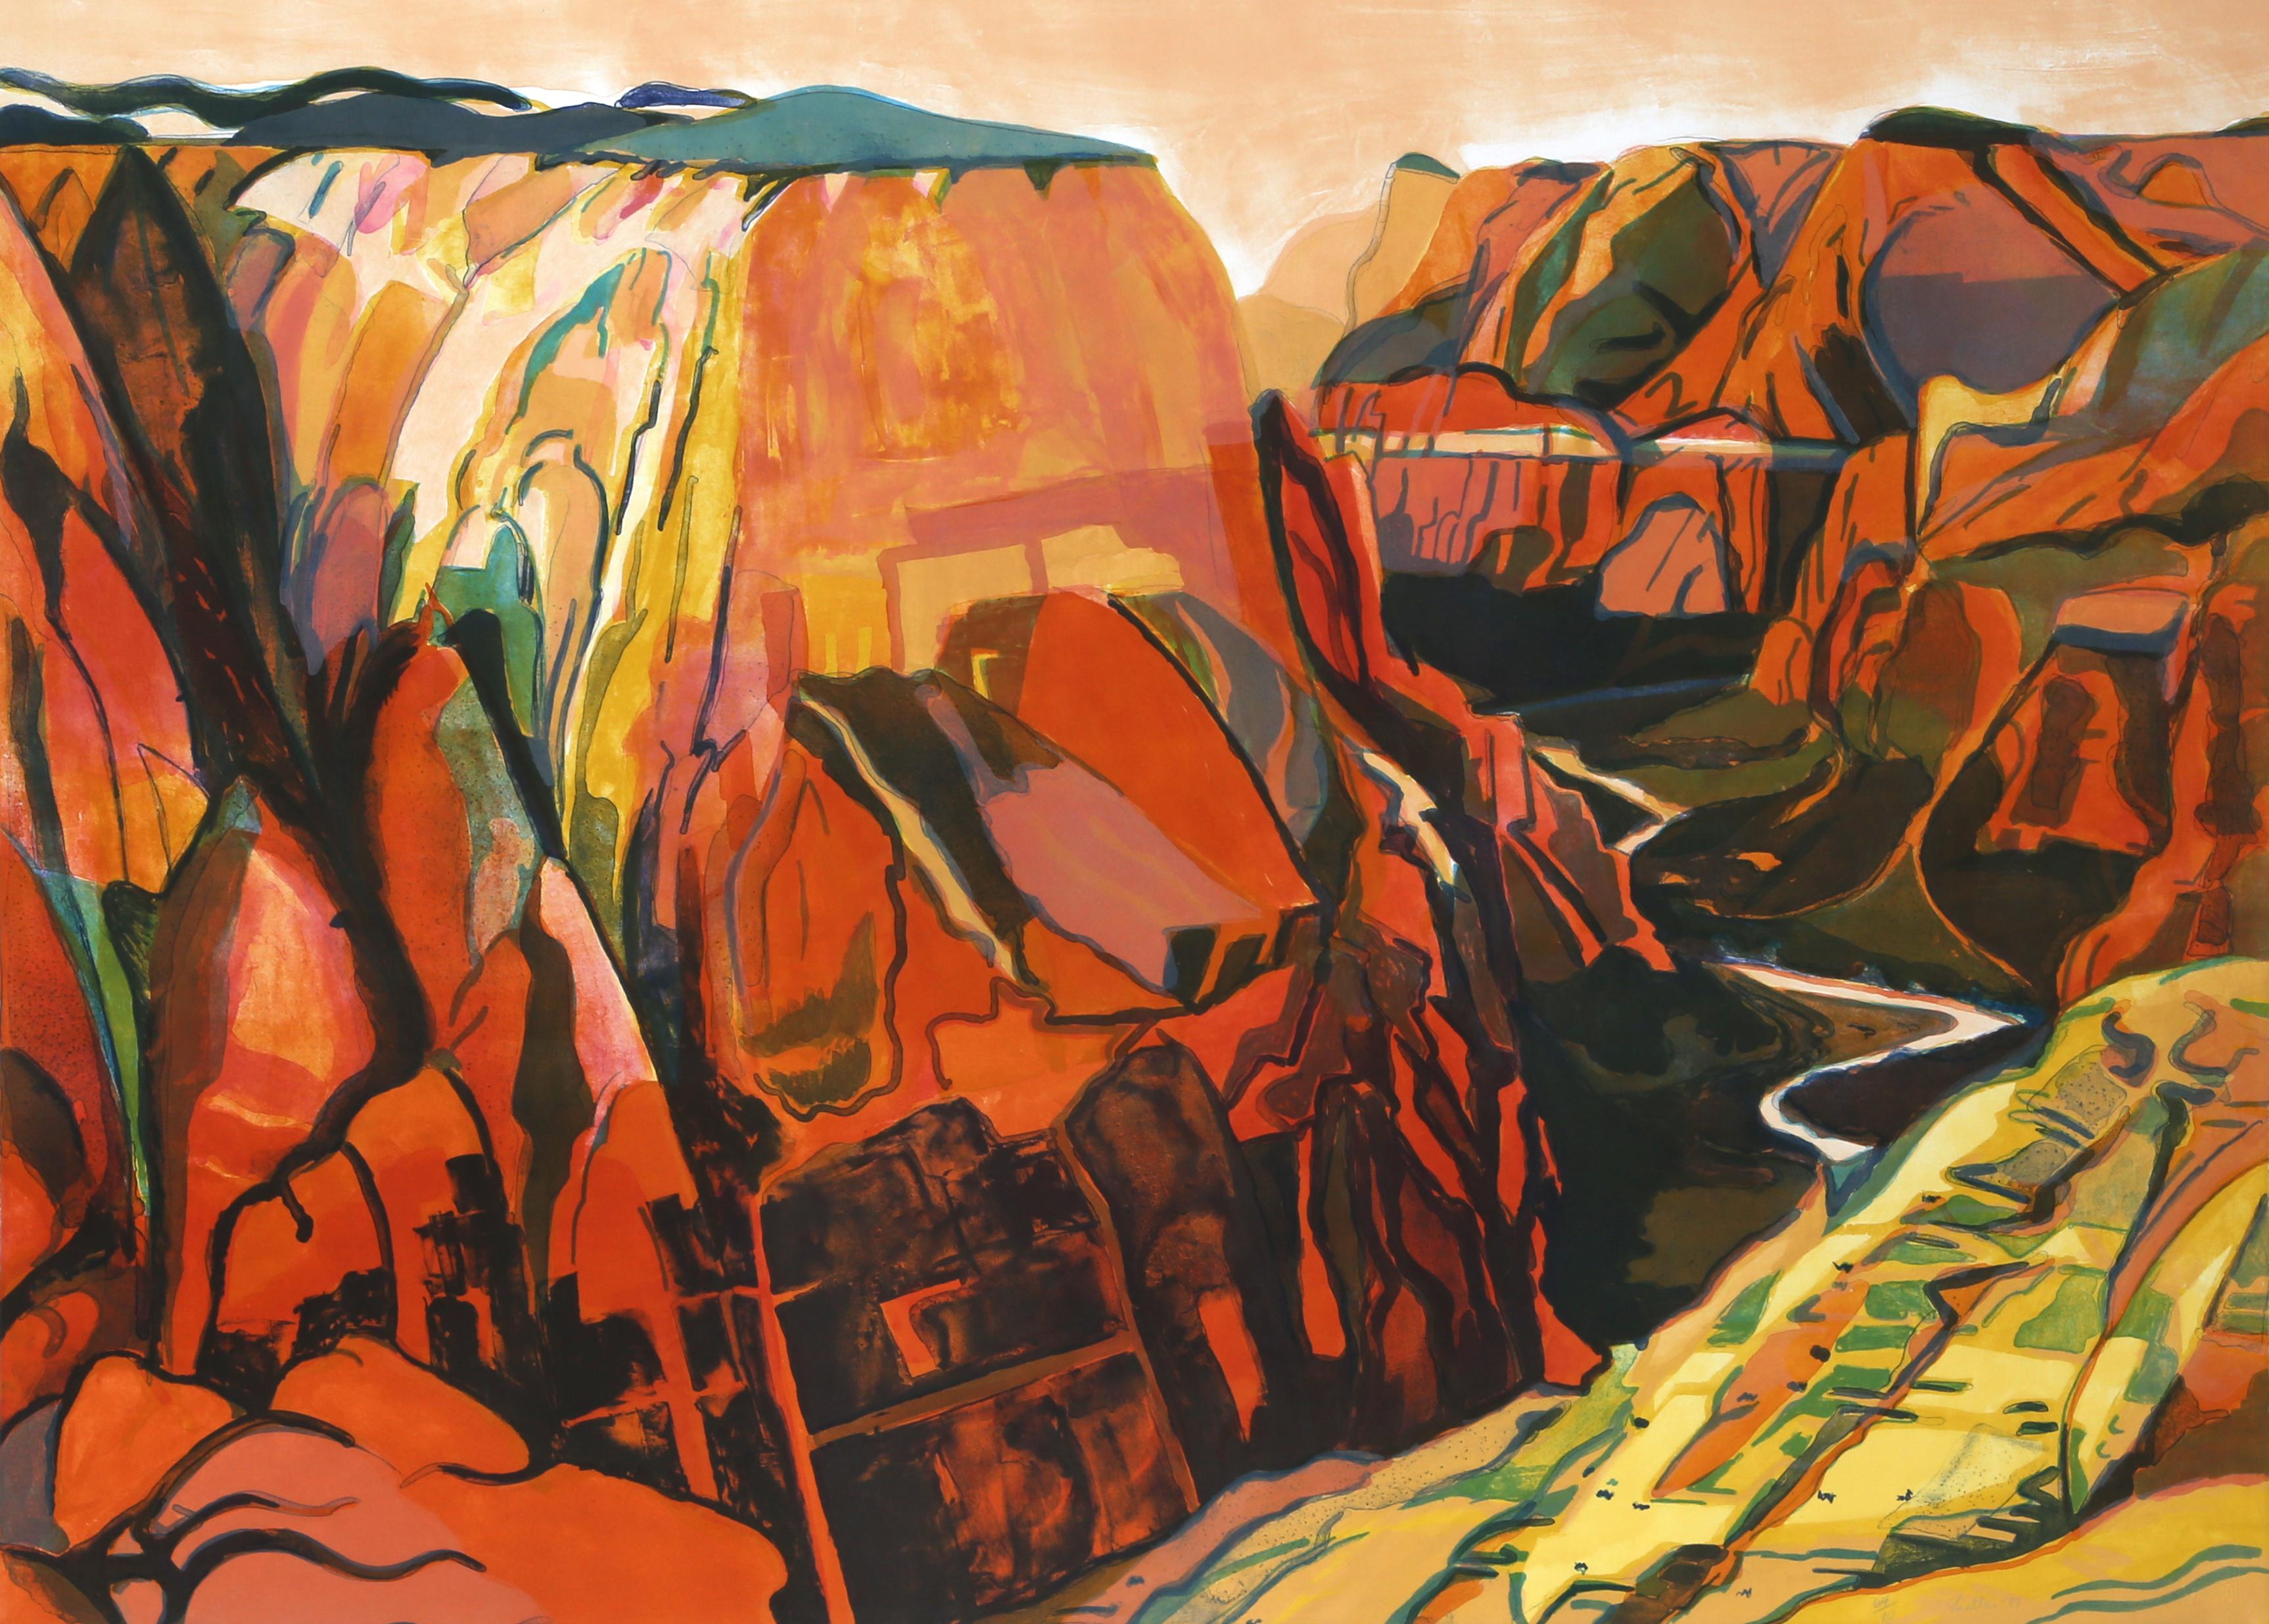 Grand Canyon
Susan Shatter, American (1943–2011)
Date: 1981
Lithograph, signed and numbered in pencil
Edition of 80
Size: 31.5 x 44 in. (80.01 x 111.76 cm)